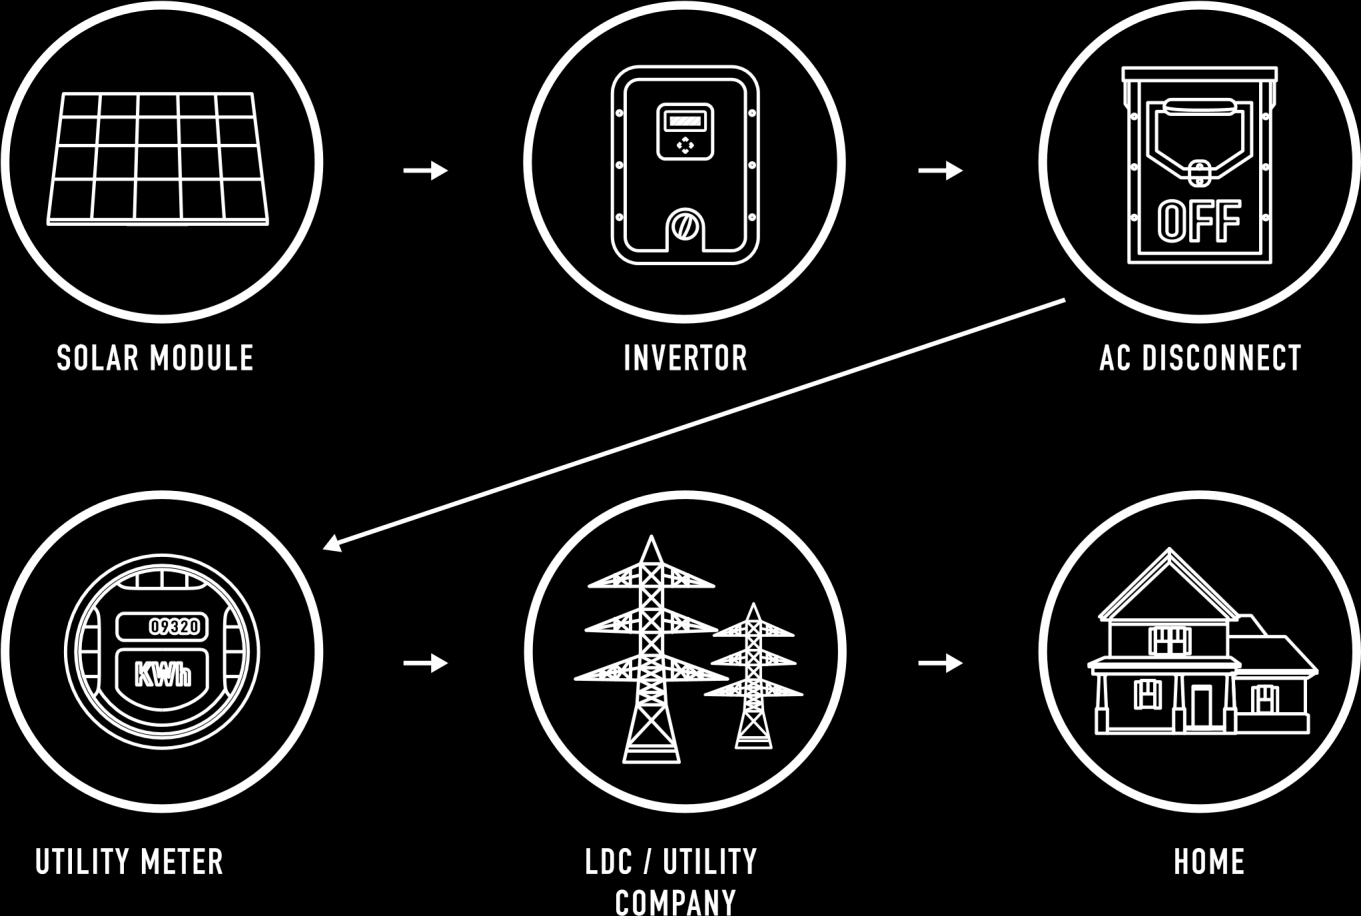 Where does the power go? POWER FLOW DIAGRAM What happens if the utility power goes off?